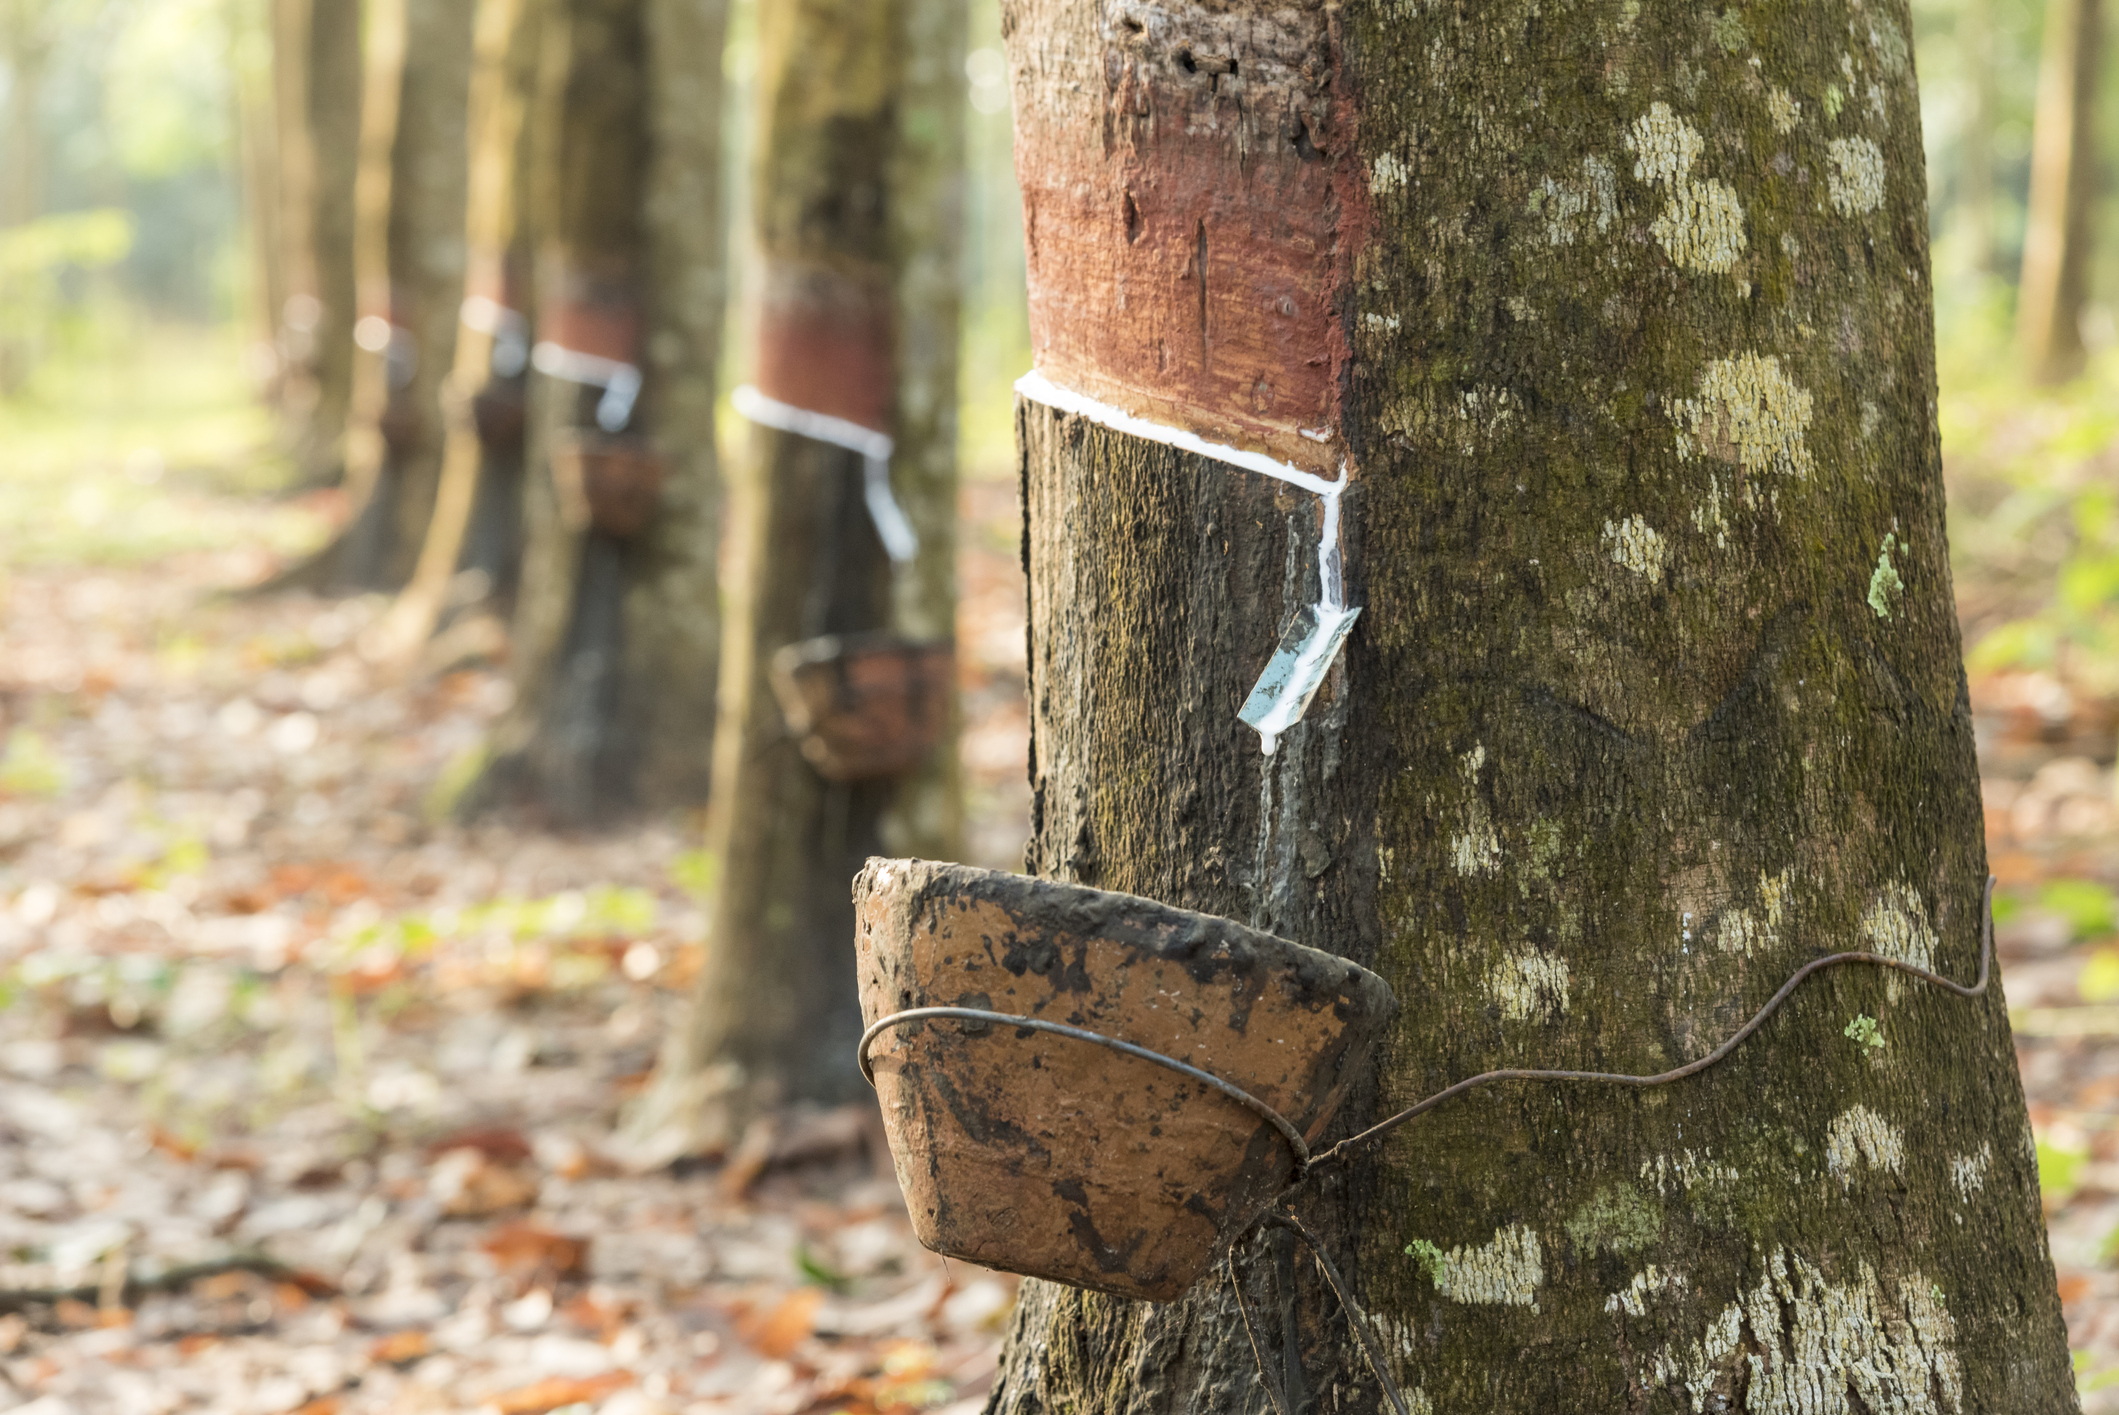 Natural rubber: It doesn't come from the rubber tree in your